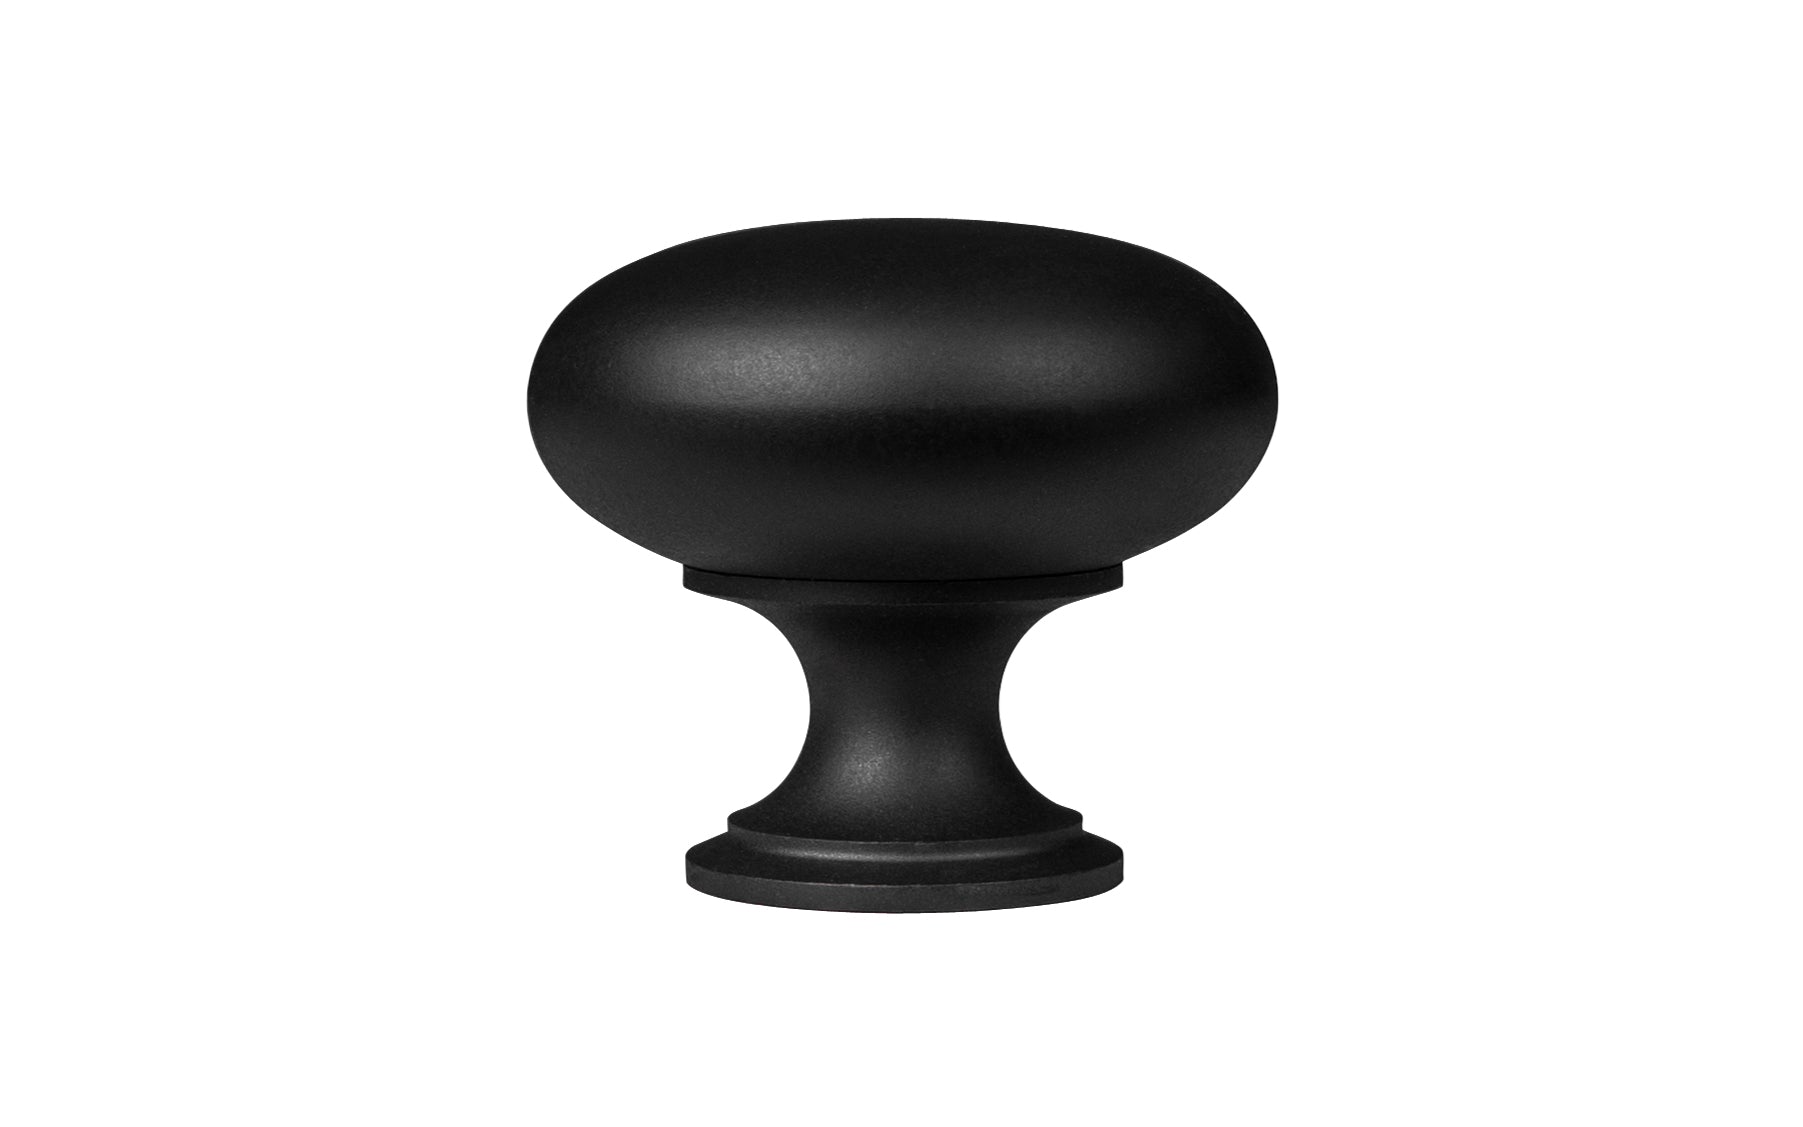 Vintage-style Hardware · Traditional & Classic Brass Knob with a Satin Black Finish. 1-1/4" diameter size knob. Made of high quality brass, this stylish round cabinet knob has a smooth look & feel on a pedestal shaped base. Works great in kitchens, bathrooms, on furniture, cabinets, drawers. Authentic reproduction hardware.